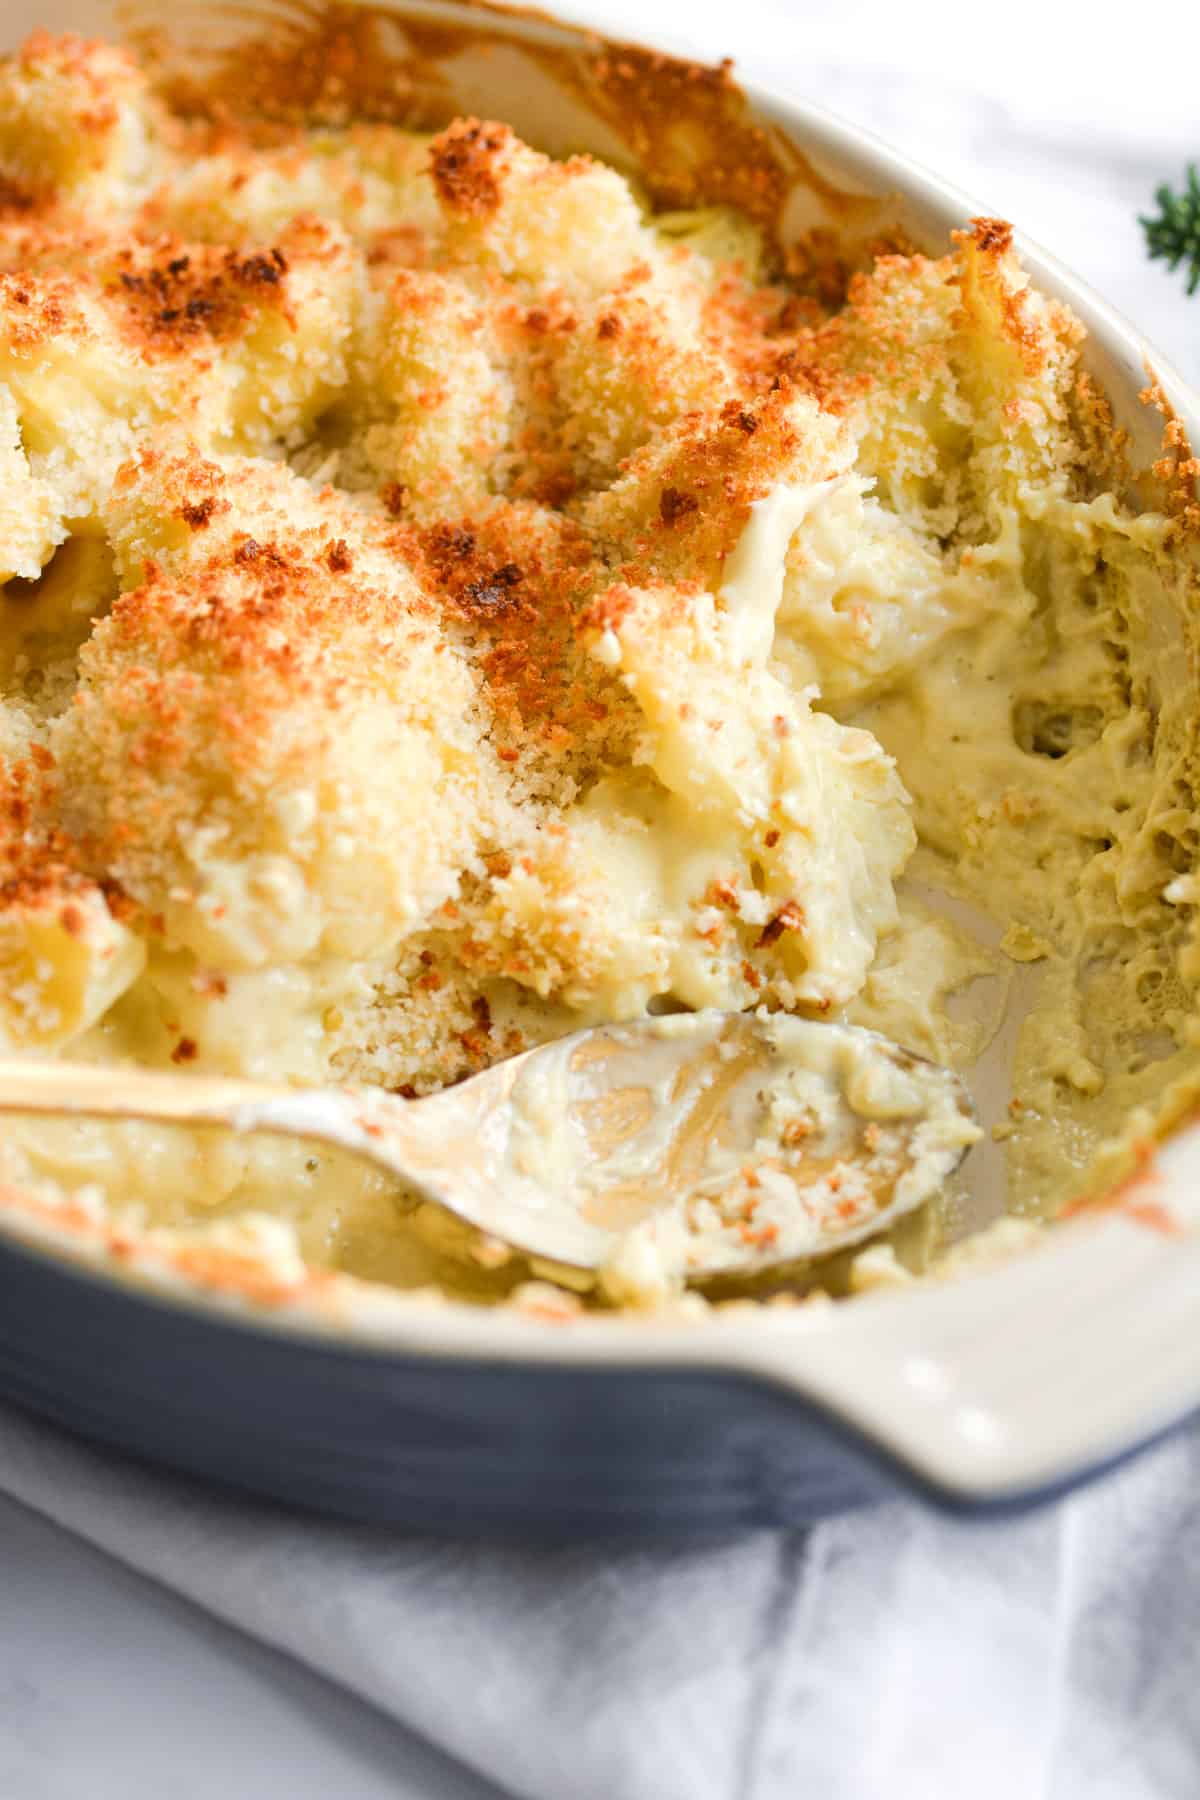 A scoop taken out of the baked vegan cheesy cauliflower casserole.